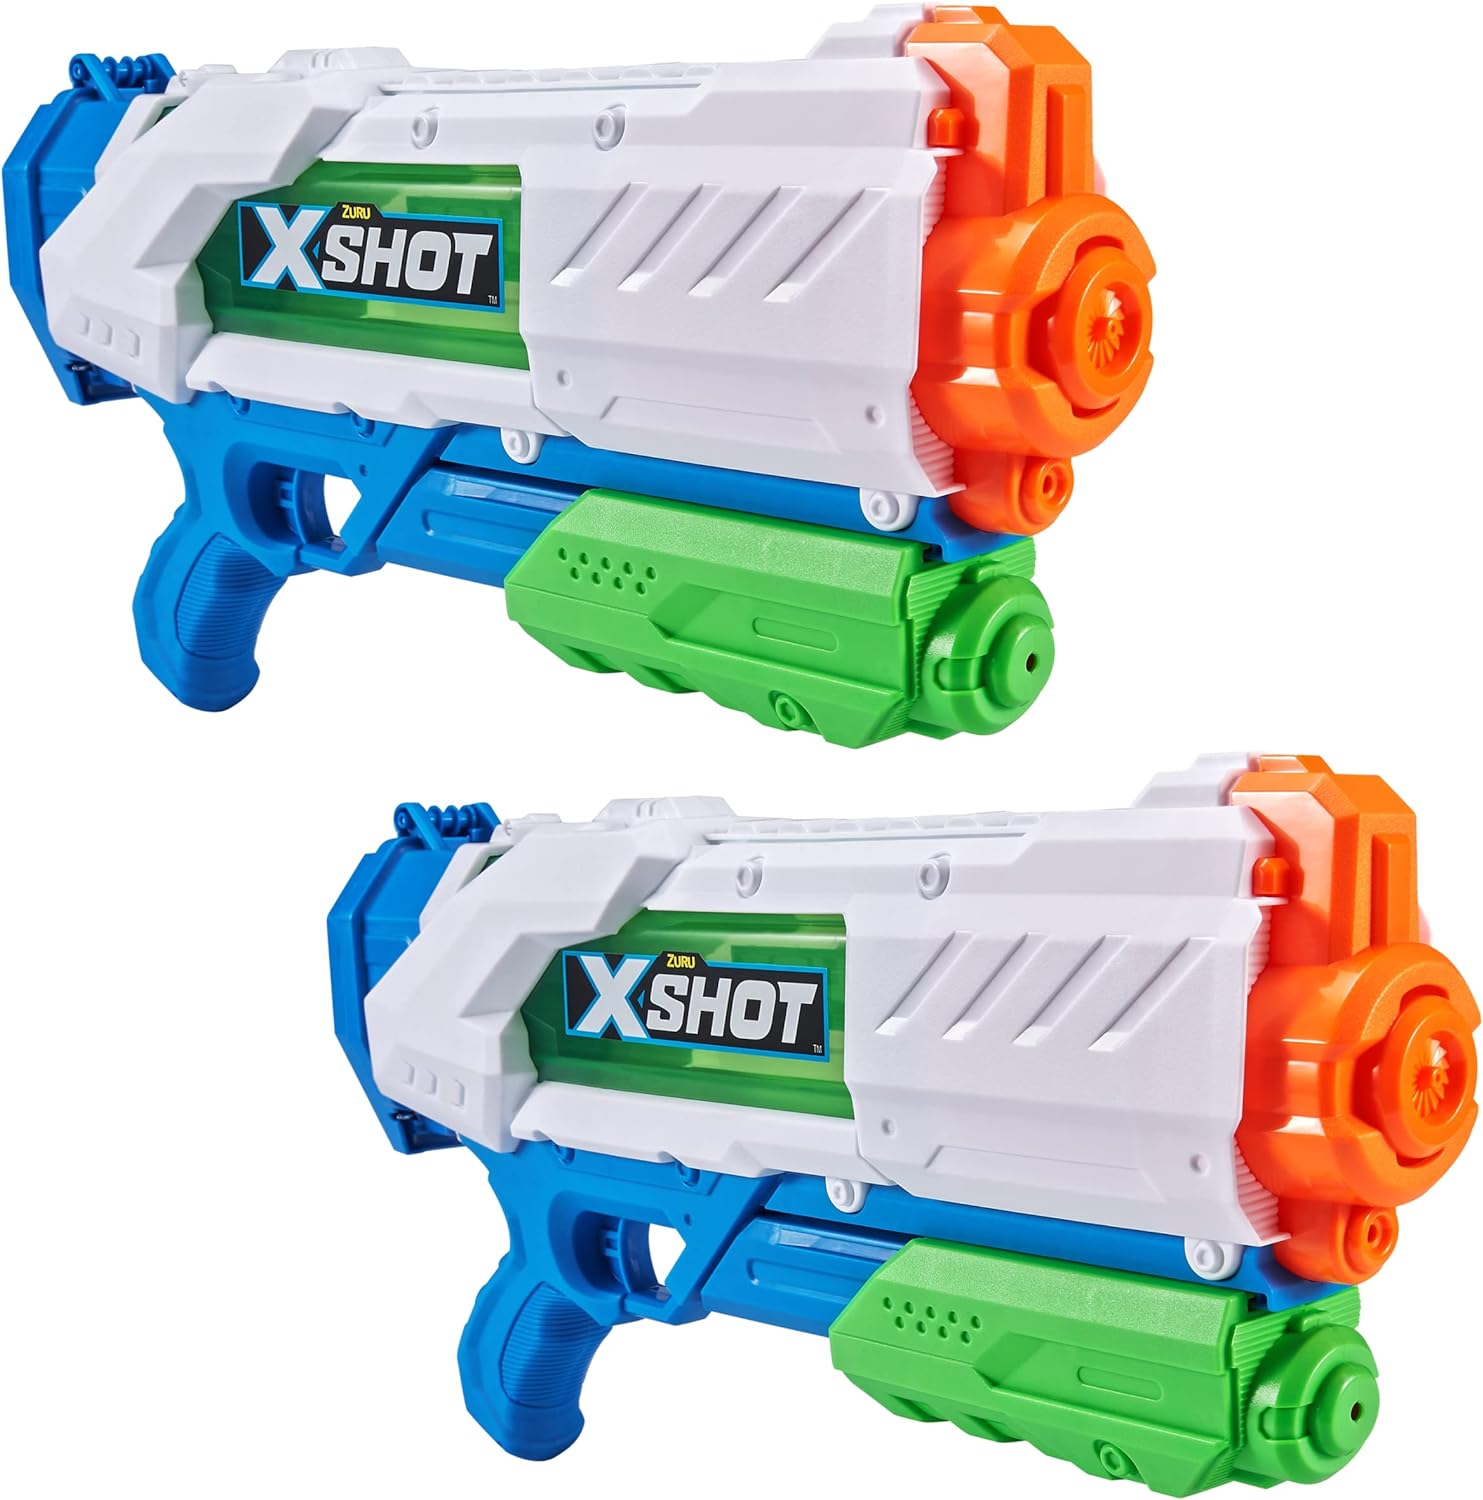 XShot Water Warfare Fast Fill (2 Pack) by ZURU, Struggle Free Packaging, Watergun, 2 Pack X Shot Water Blaster (Fills with Water in just 1 Second!)